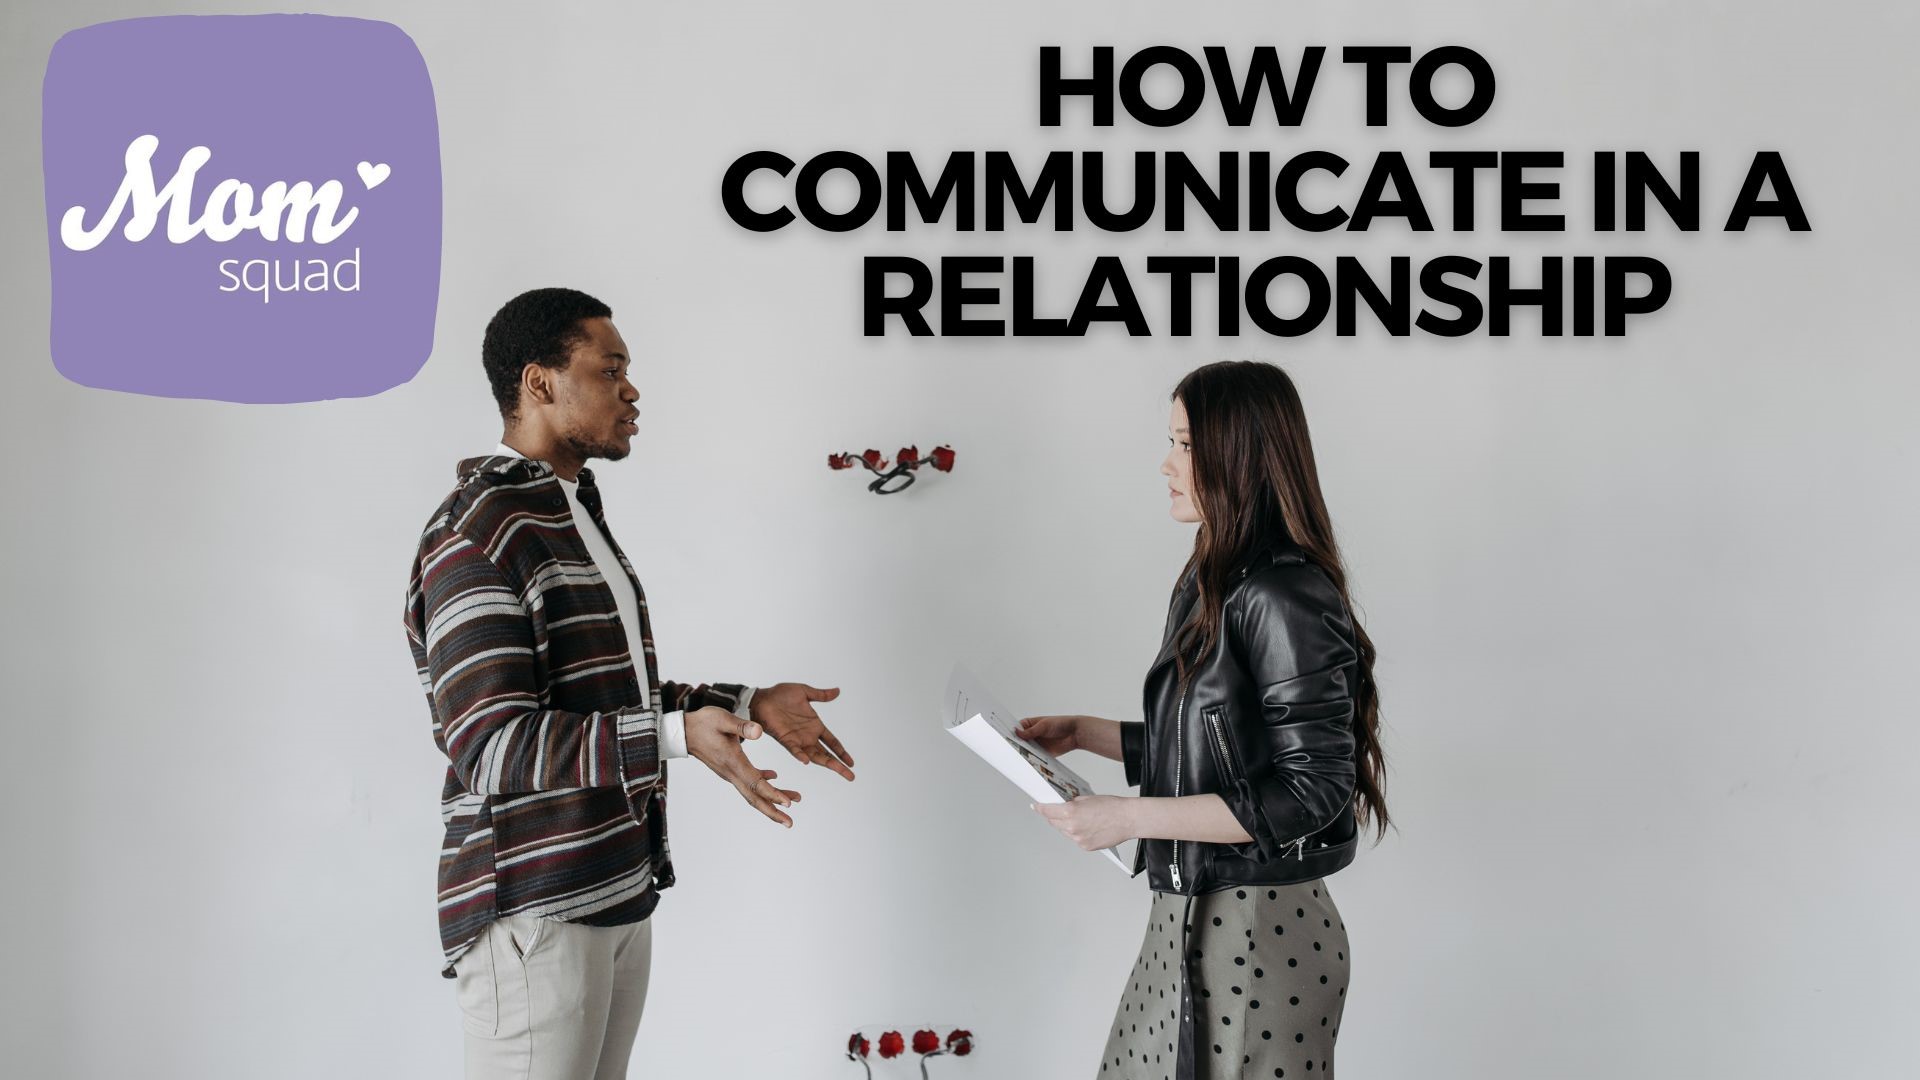 Maureen Kyle sits down with a psychologist to discuss ways to improve communication in relationships. Tips on how to talk to your partner and when to seek help.